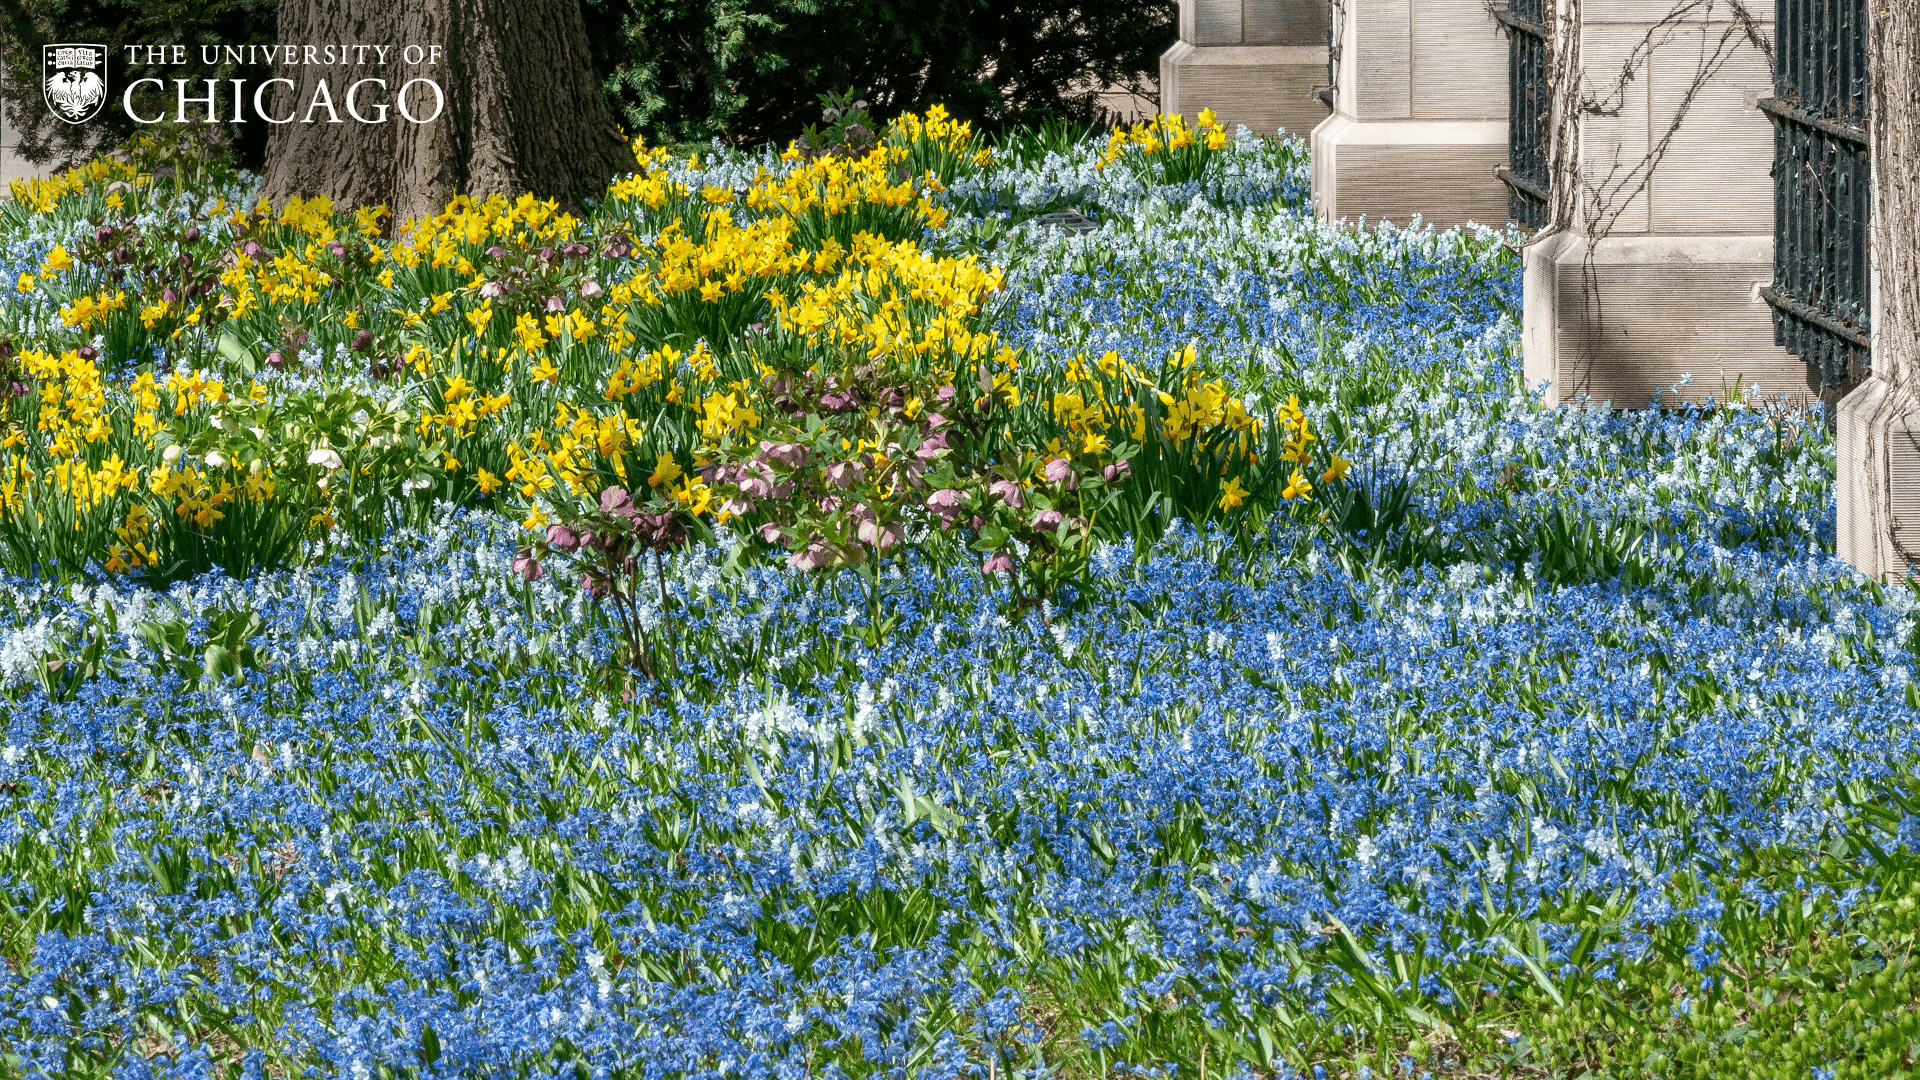 Field of blue and yellow blooming flowers